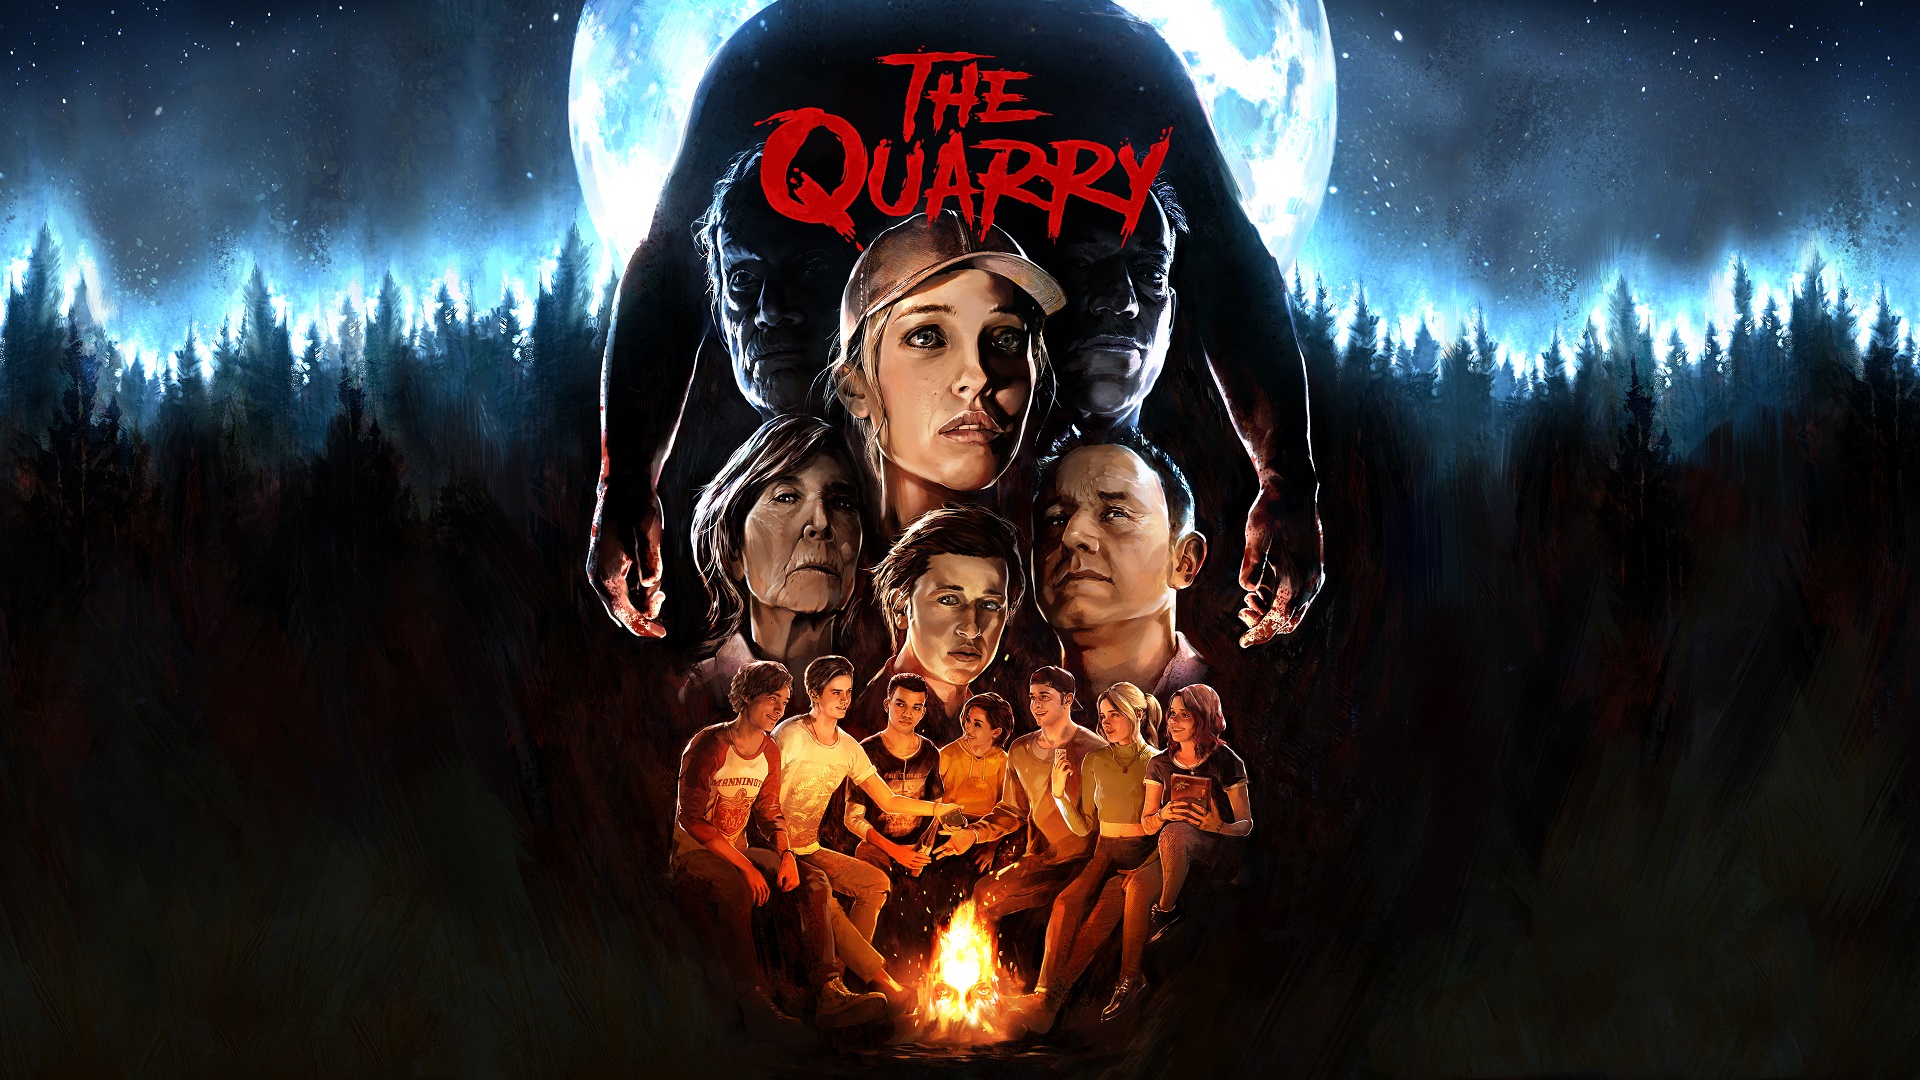 Interactive teen horror movie game The Quarry is now available